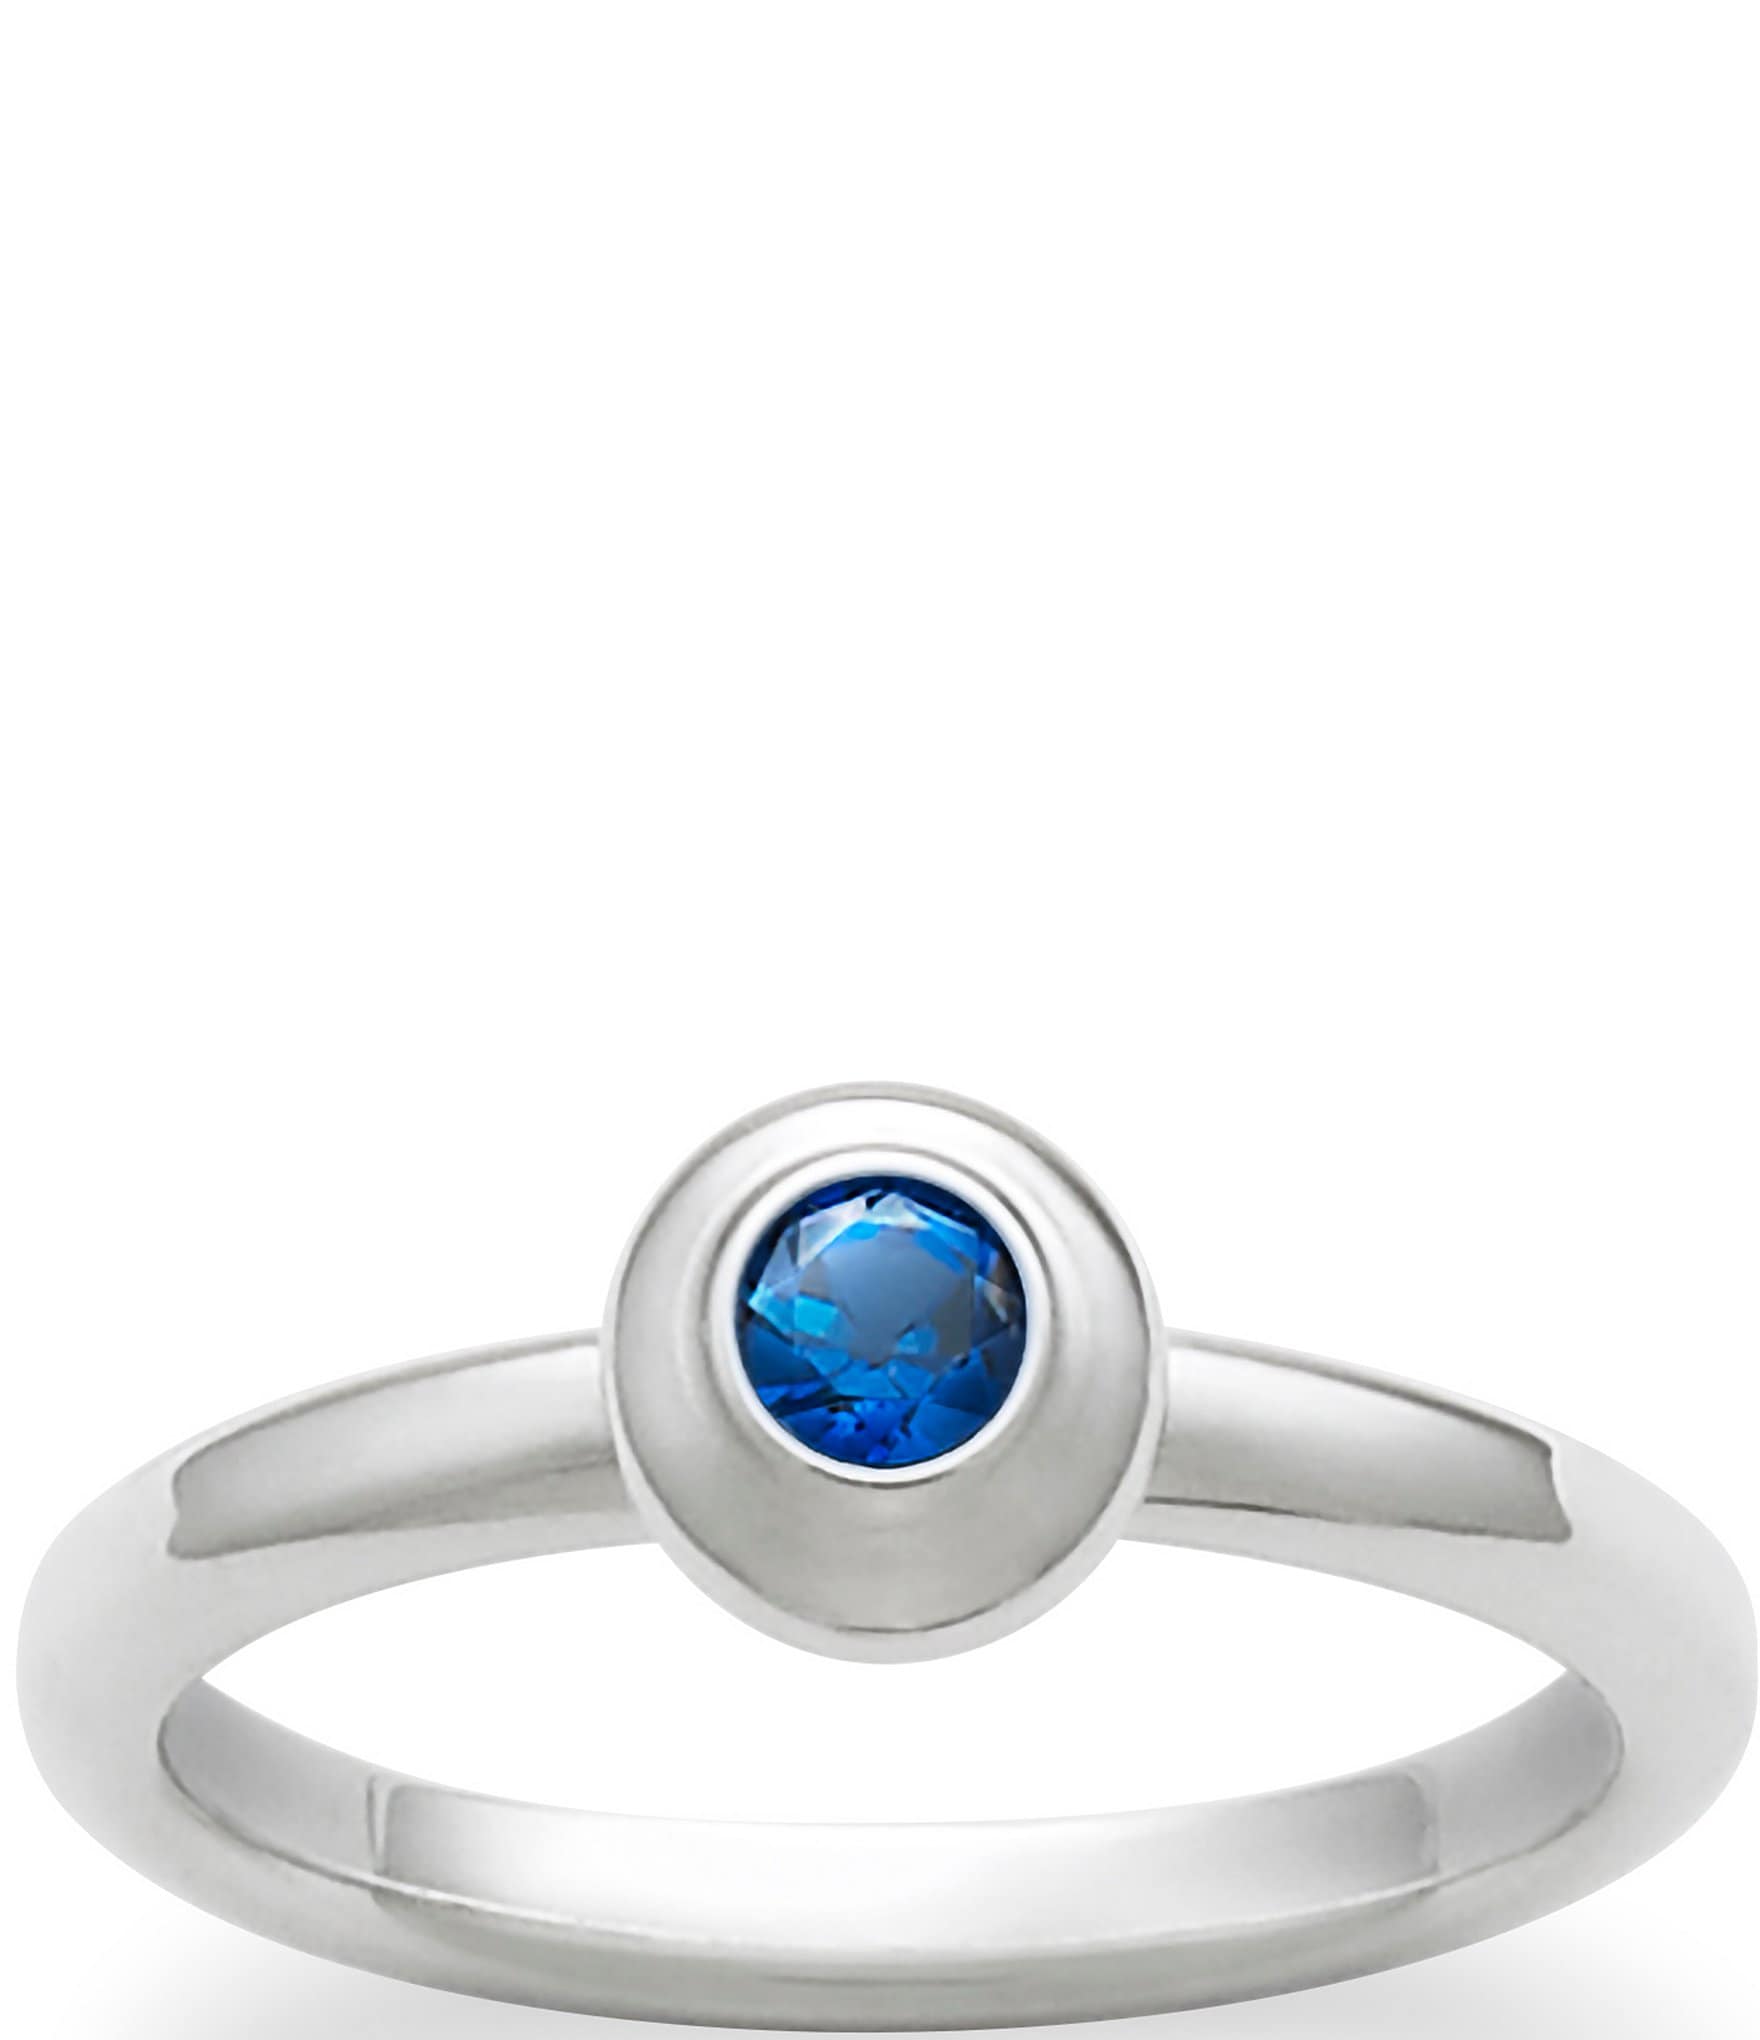 Blue Sapphire ring round cut in gold or silver September birthstone For  sale - Vivies Jewelry